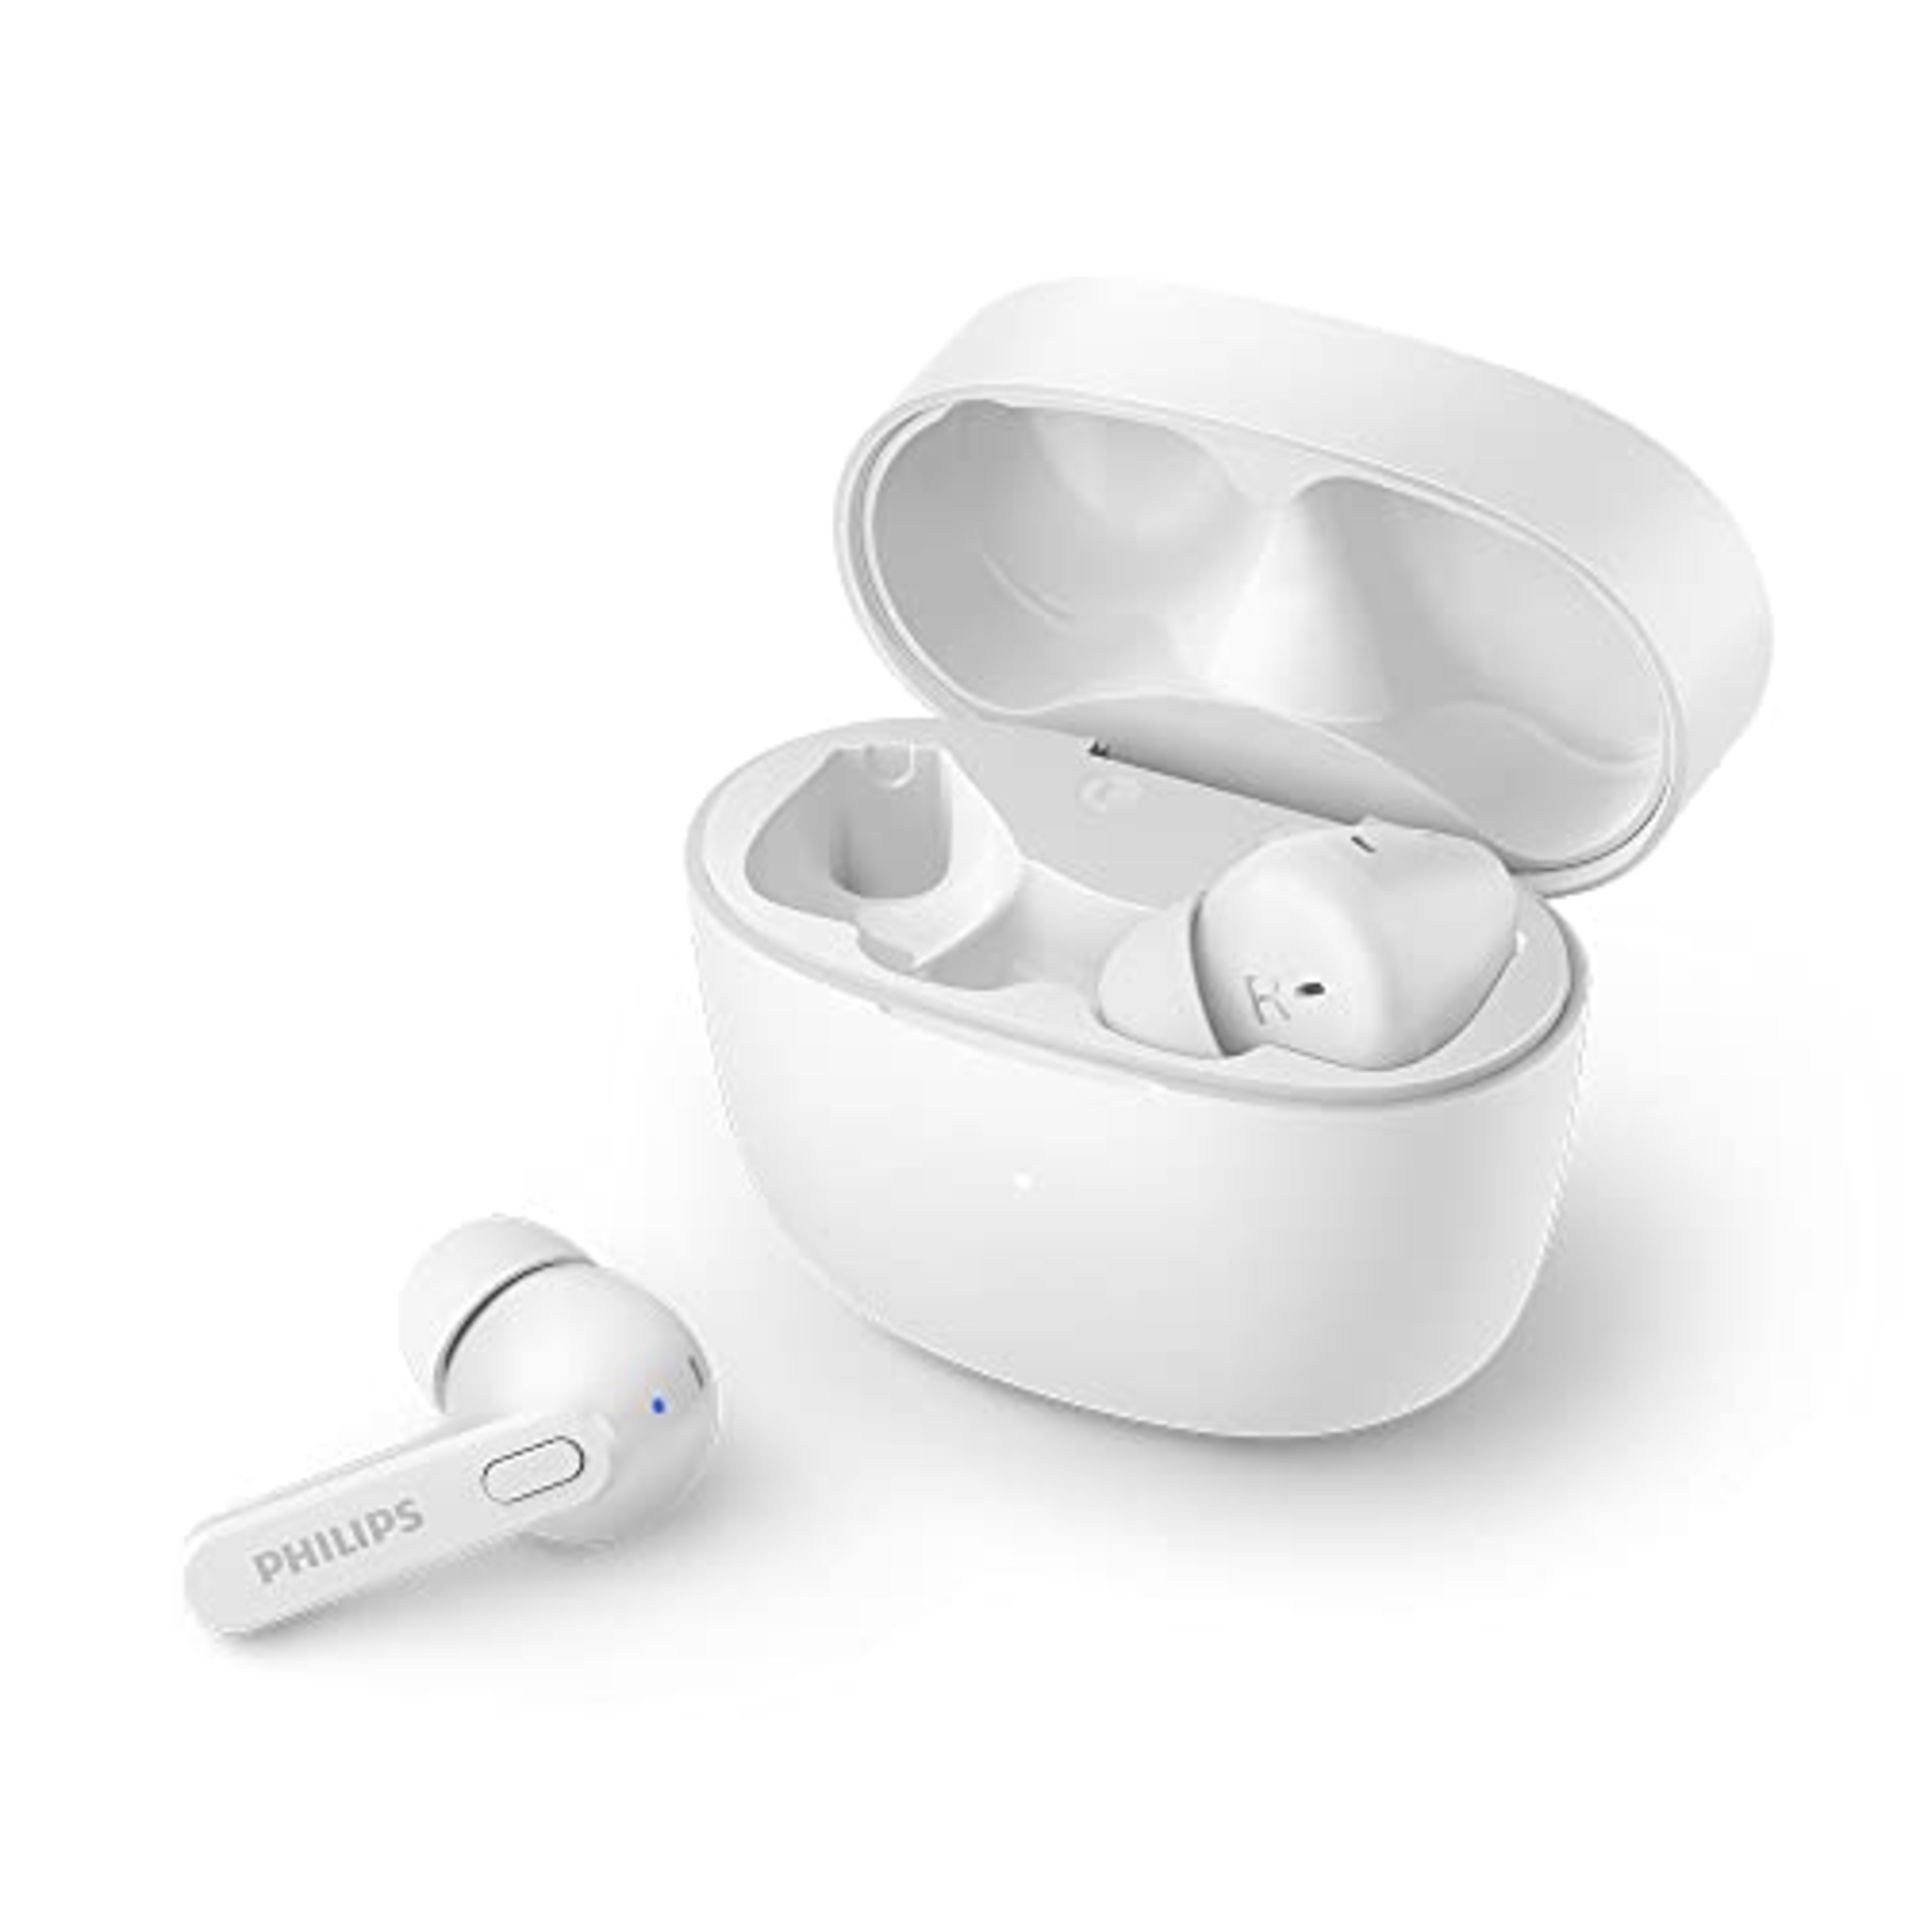 PHILIPS Bluetooth Earphones with Wireless Microphone, Sweat-Resistant, 18 Hours of Pla - Image 4 of 6